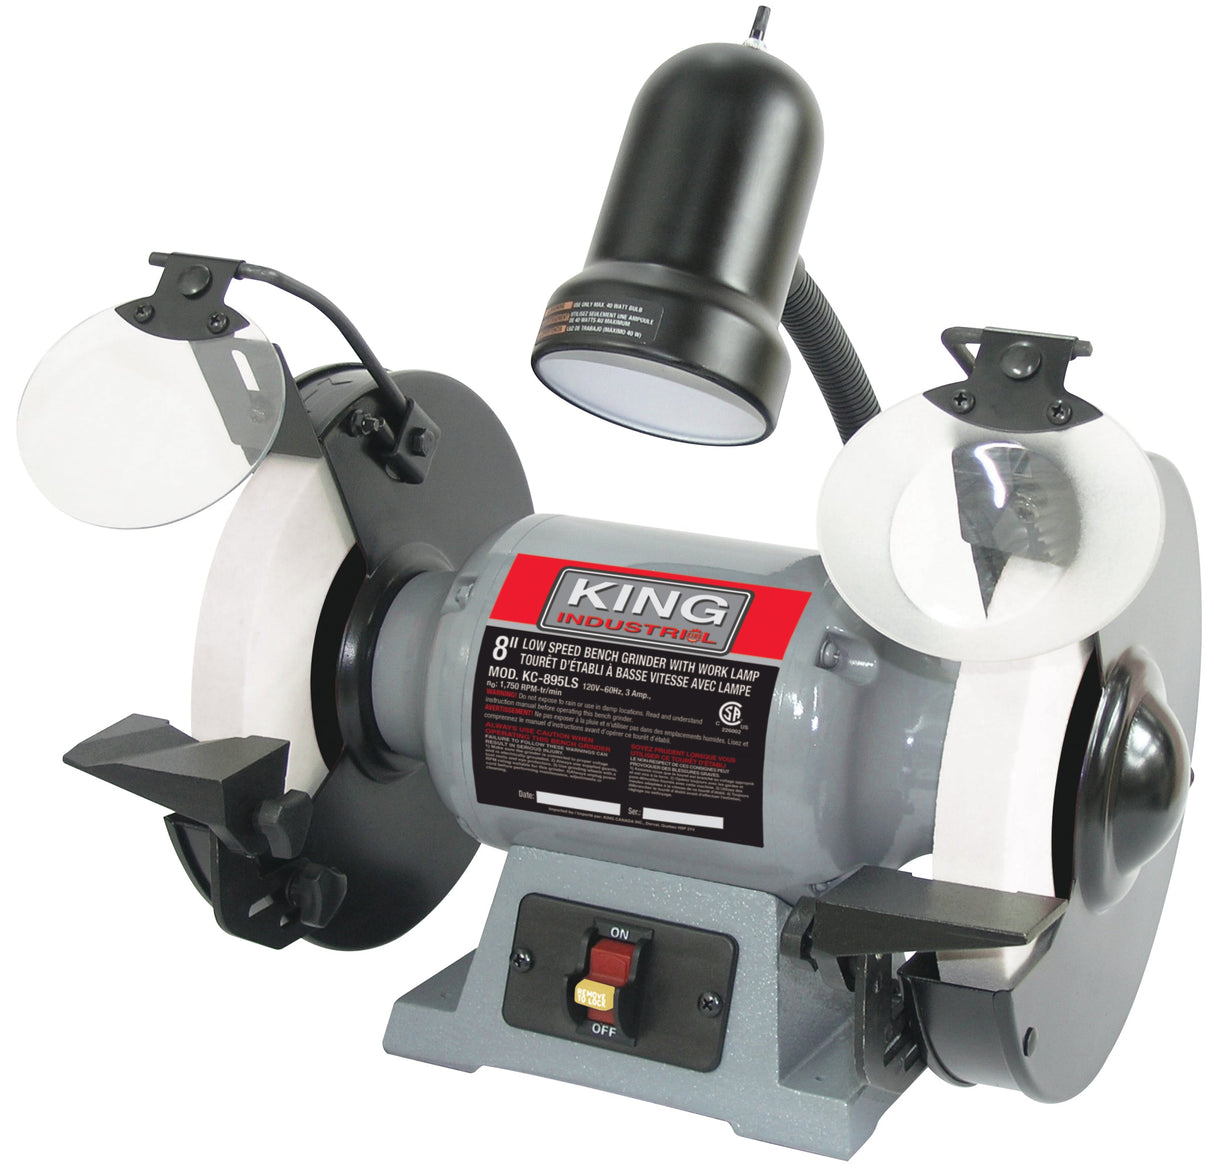 King Canada Grinder 8" LOW SPEED BENCH GRINDER WITH LIGHT